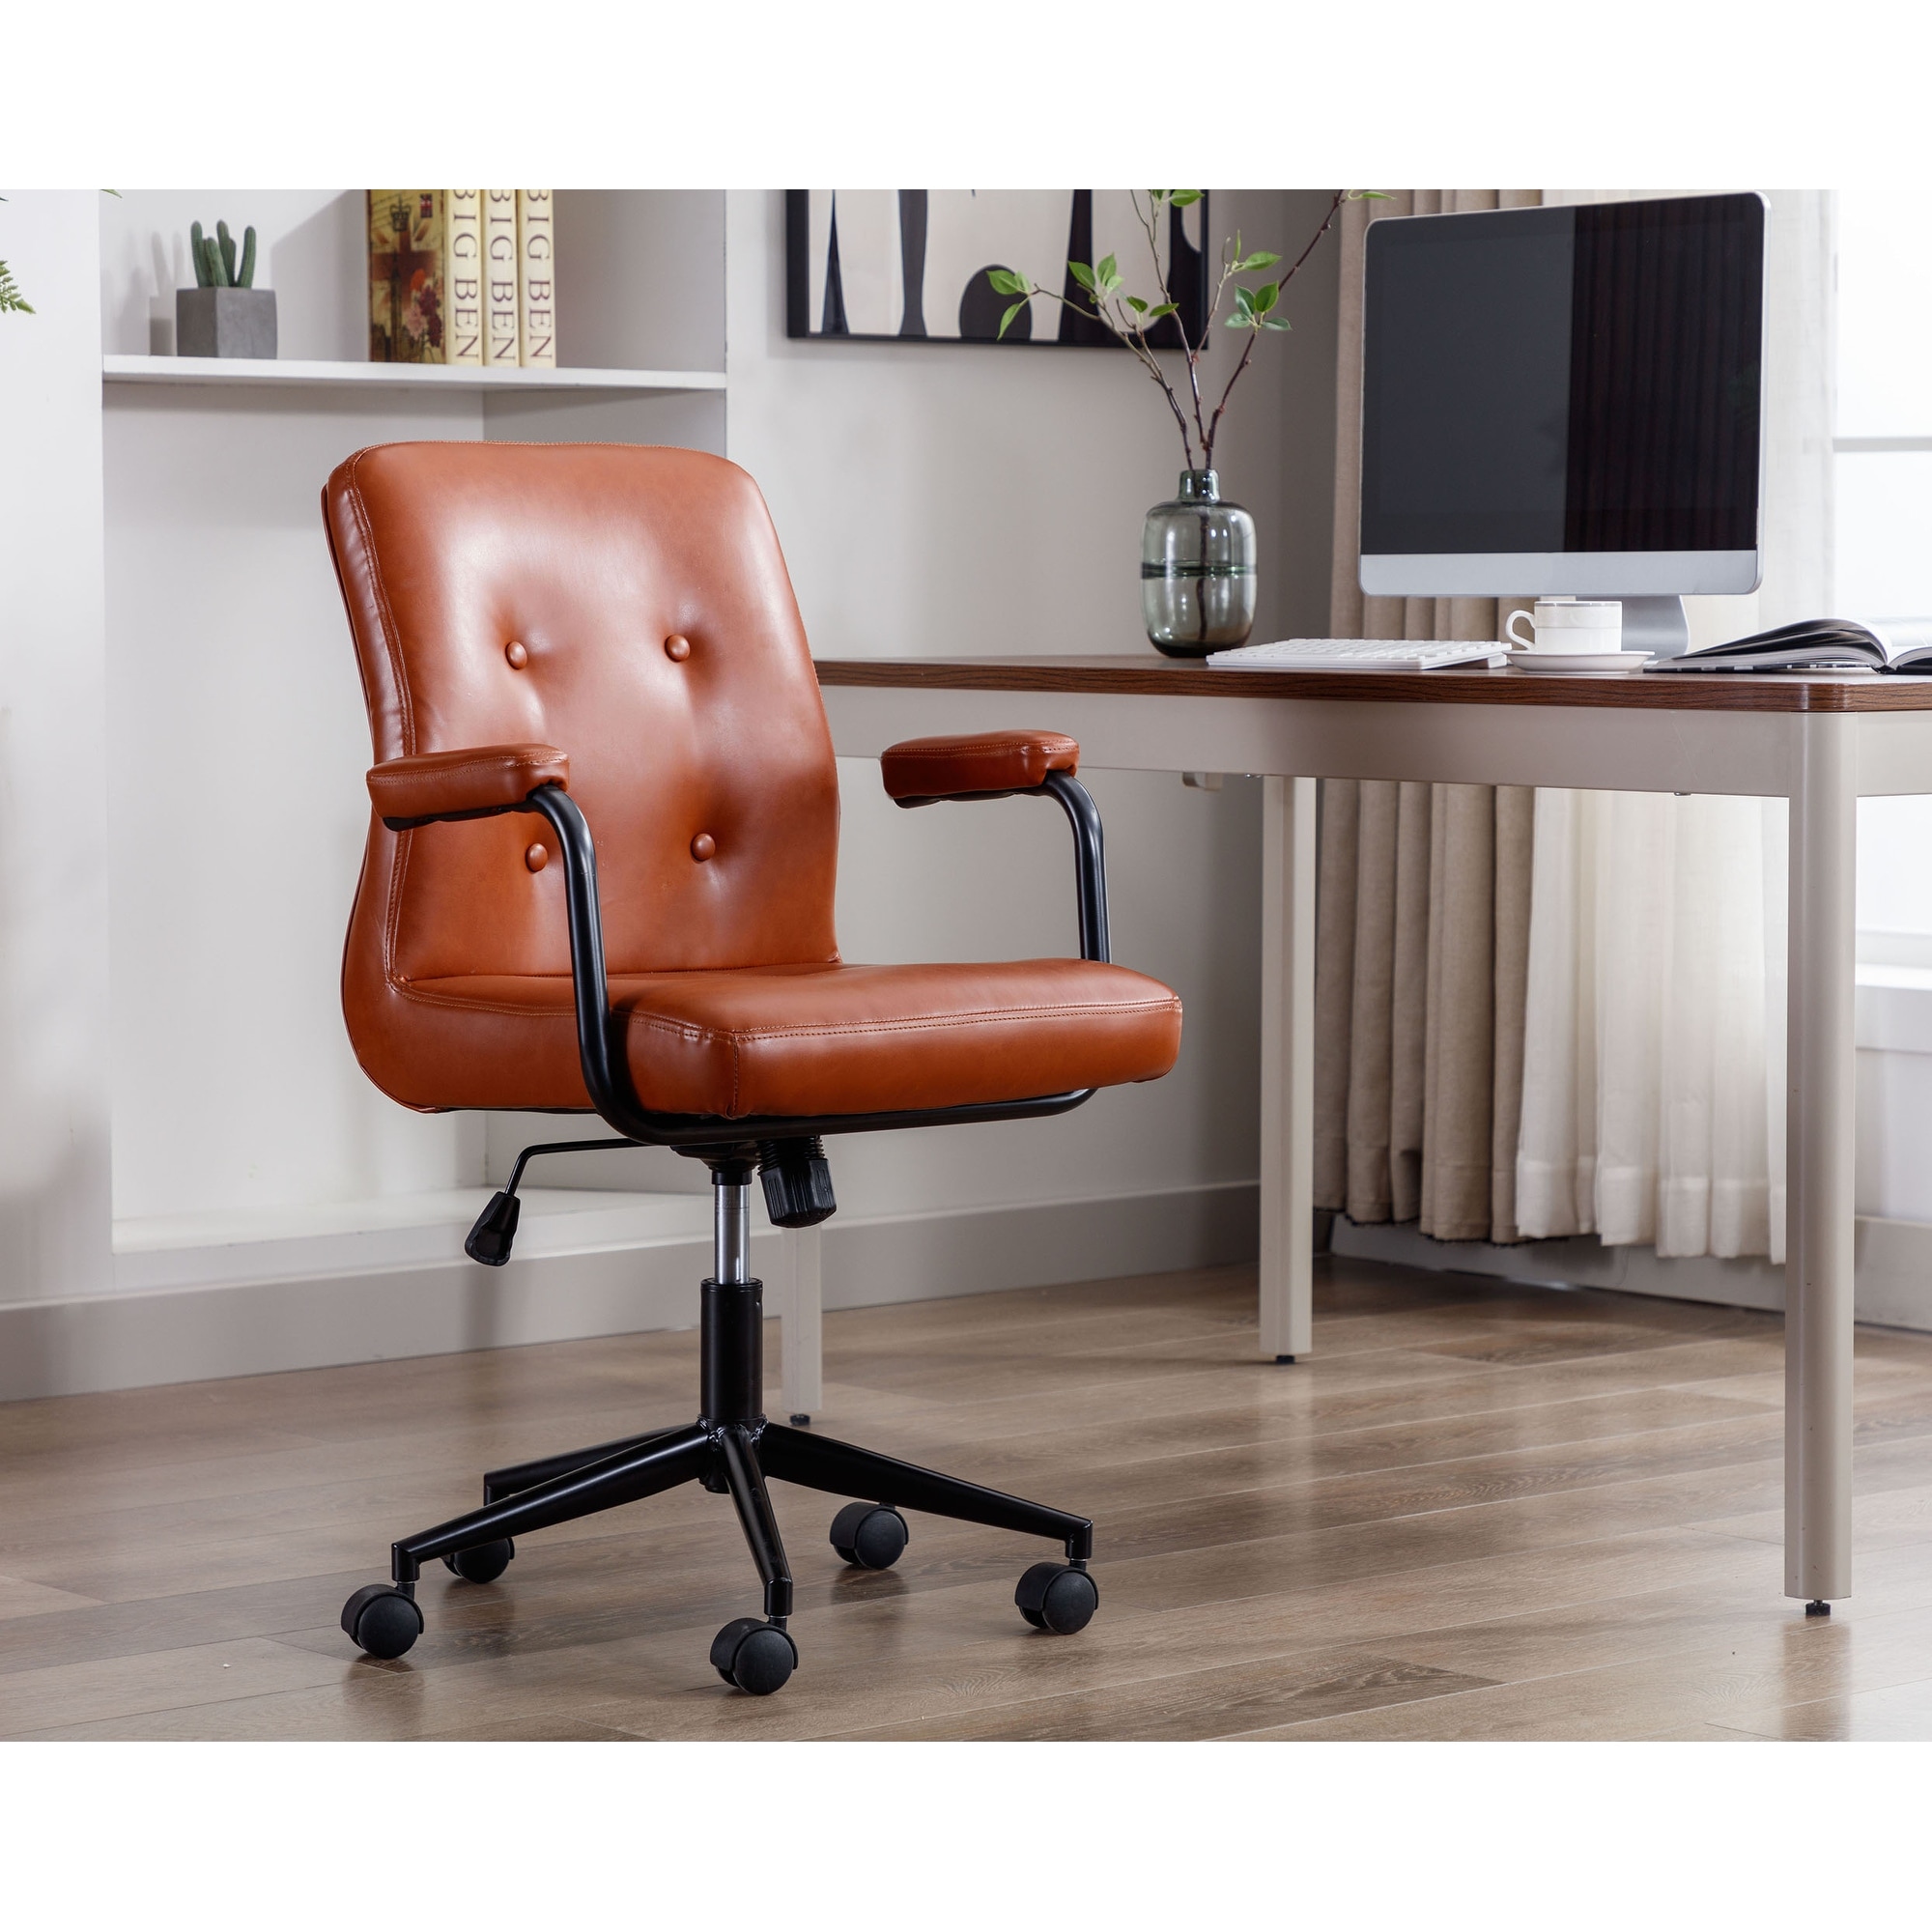 https://ak1.ostkcdn.com/images/products/is/images/direct/7d30ac9317b3d45aabc41d07a85e78eb47d59684/Porthos-Home-Ames-Faux-Leather-Office-Chair-with-Steel-Roller-Base%2C-Central-Tilt-System.jpg